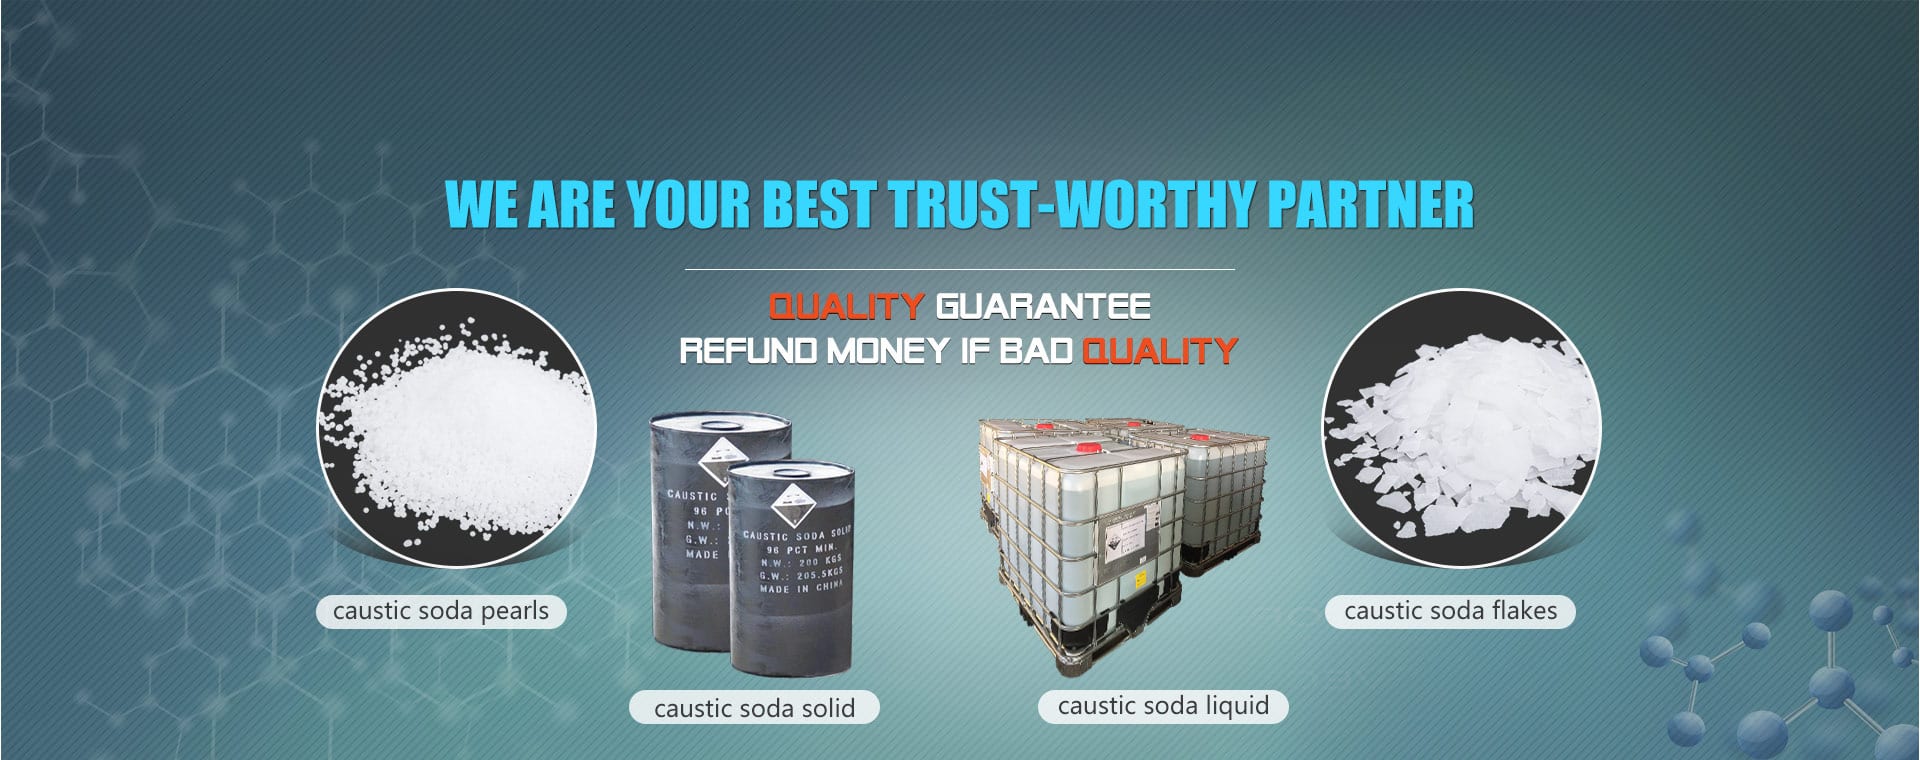 WE ARE YOUR BEST TRUST-WORTHY PARTNER